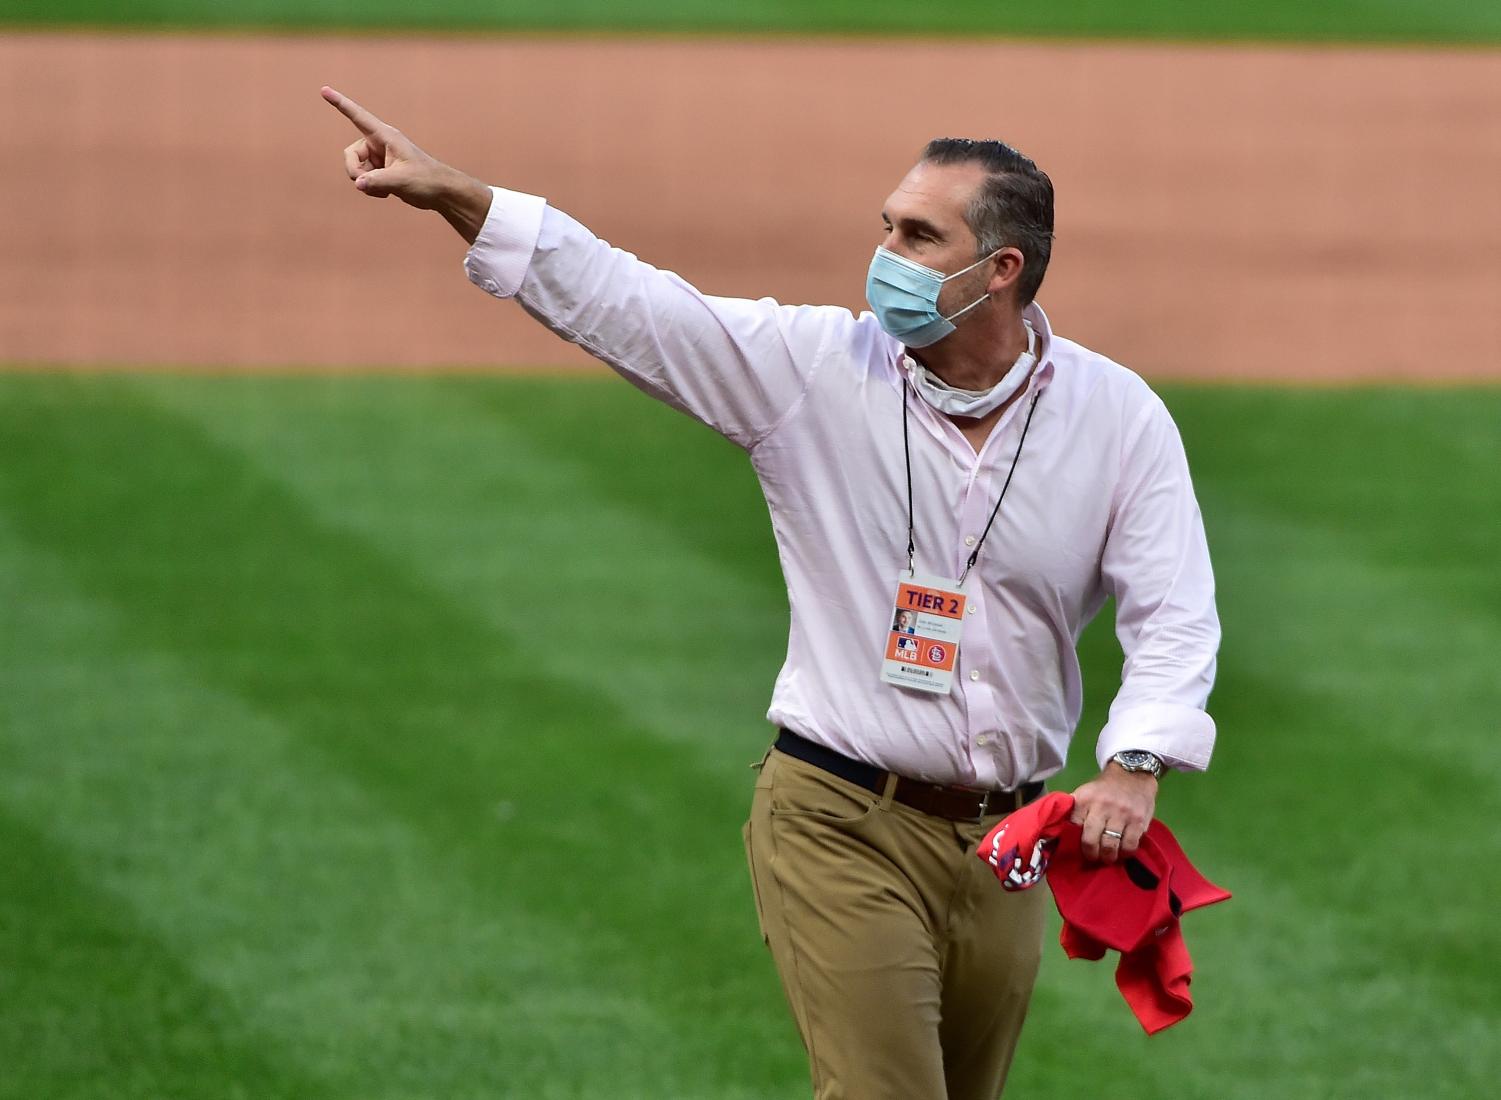 Gordo: John Mozeliak vows to stay the course for Cardinals but